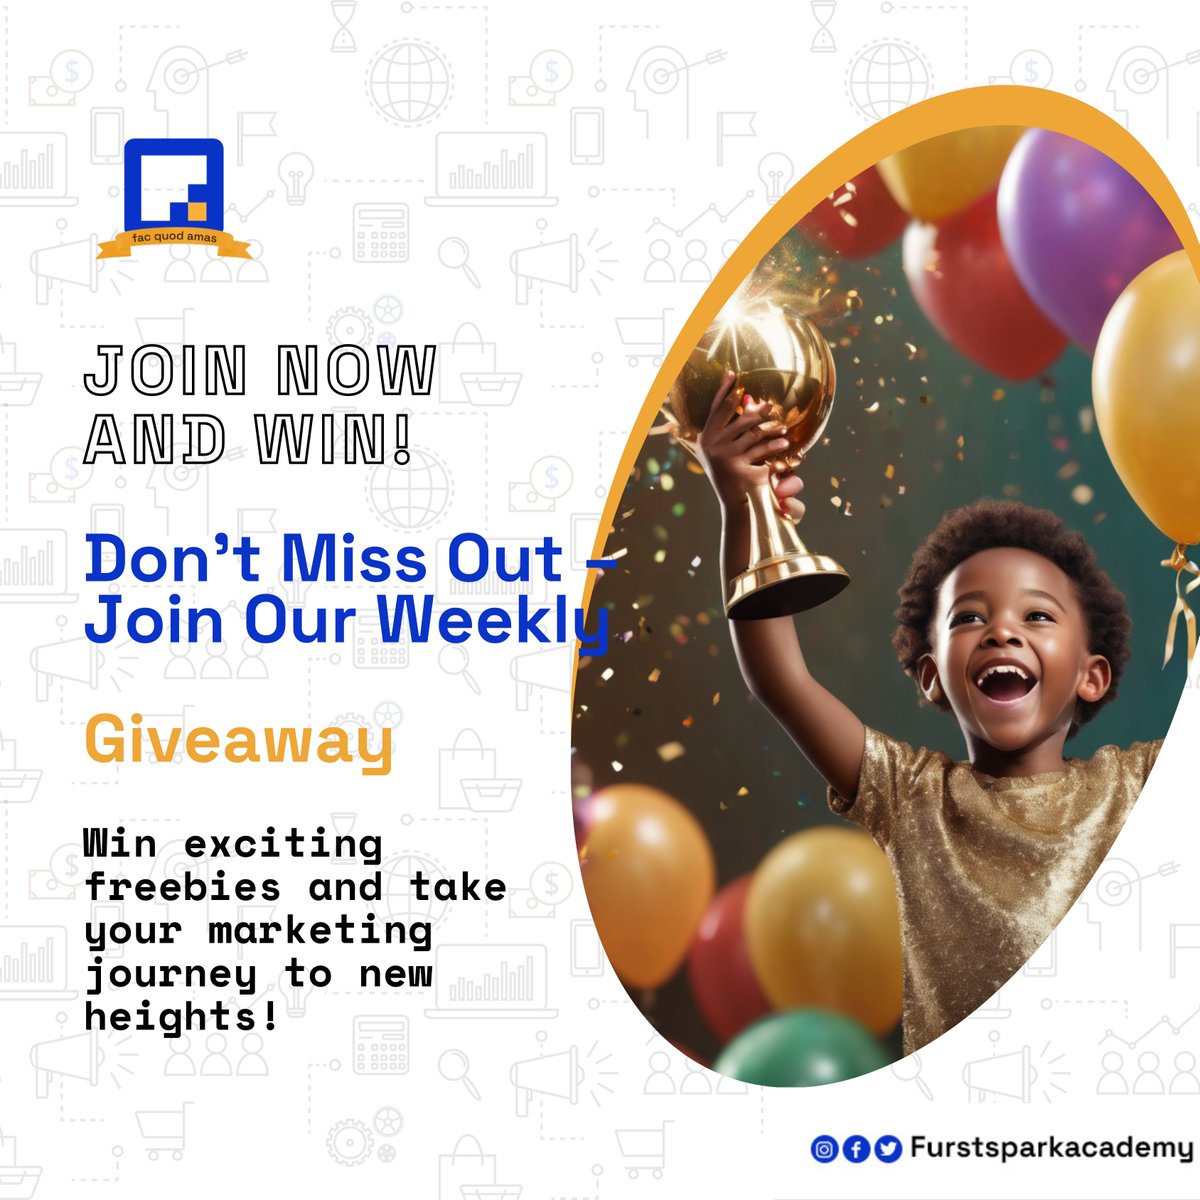 Here comes your #MarketingCommunity! 
🔍 Learn SEO, social media, email marketing & more! 
💡 Exclusive resources, webinars & networking opps! 
👯 Make new friends & level up your marketing skills! 🤓
Don't miss out! Join now 

👉bit.ly/FurstSparkAcad…

#FurstSparkAcademy